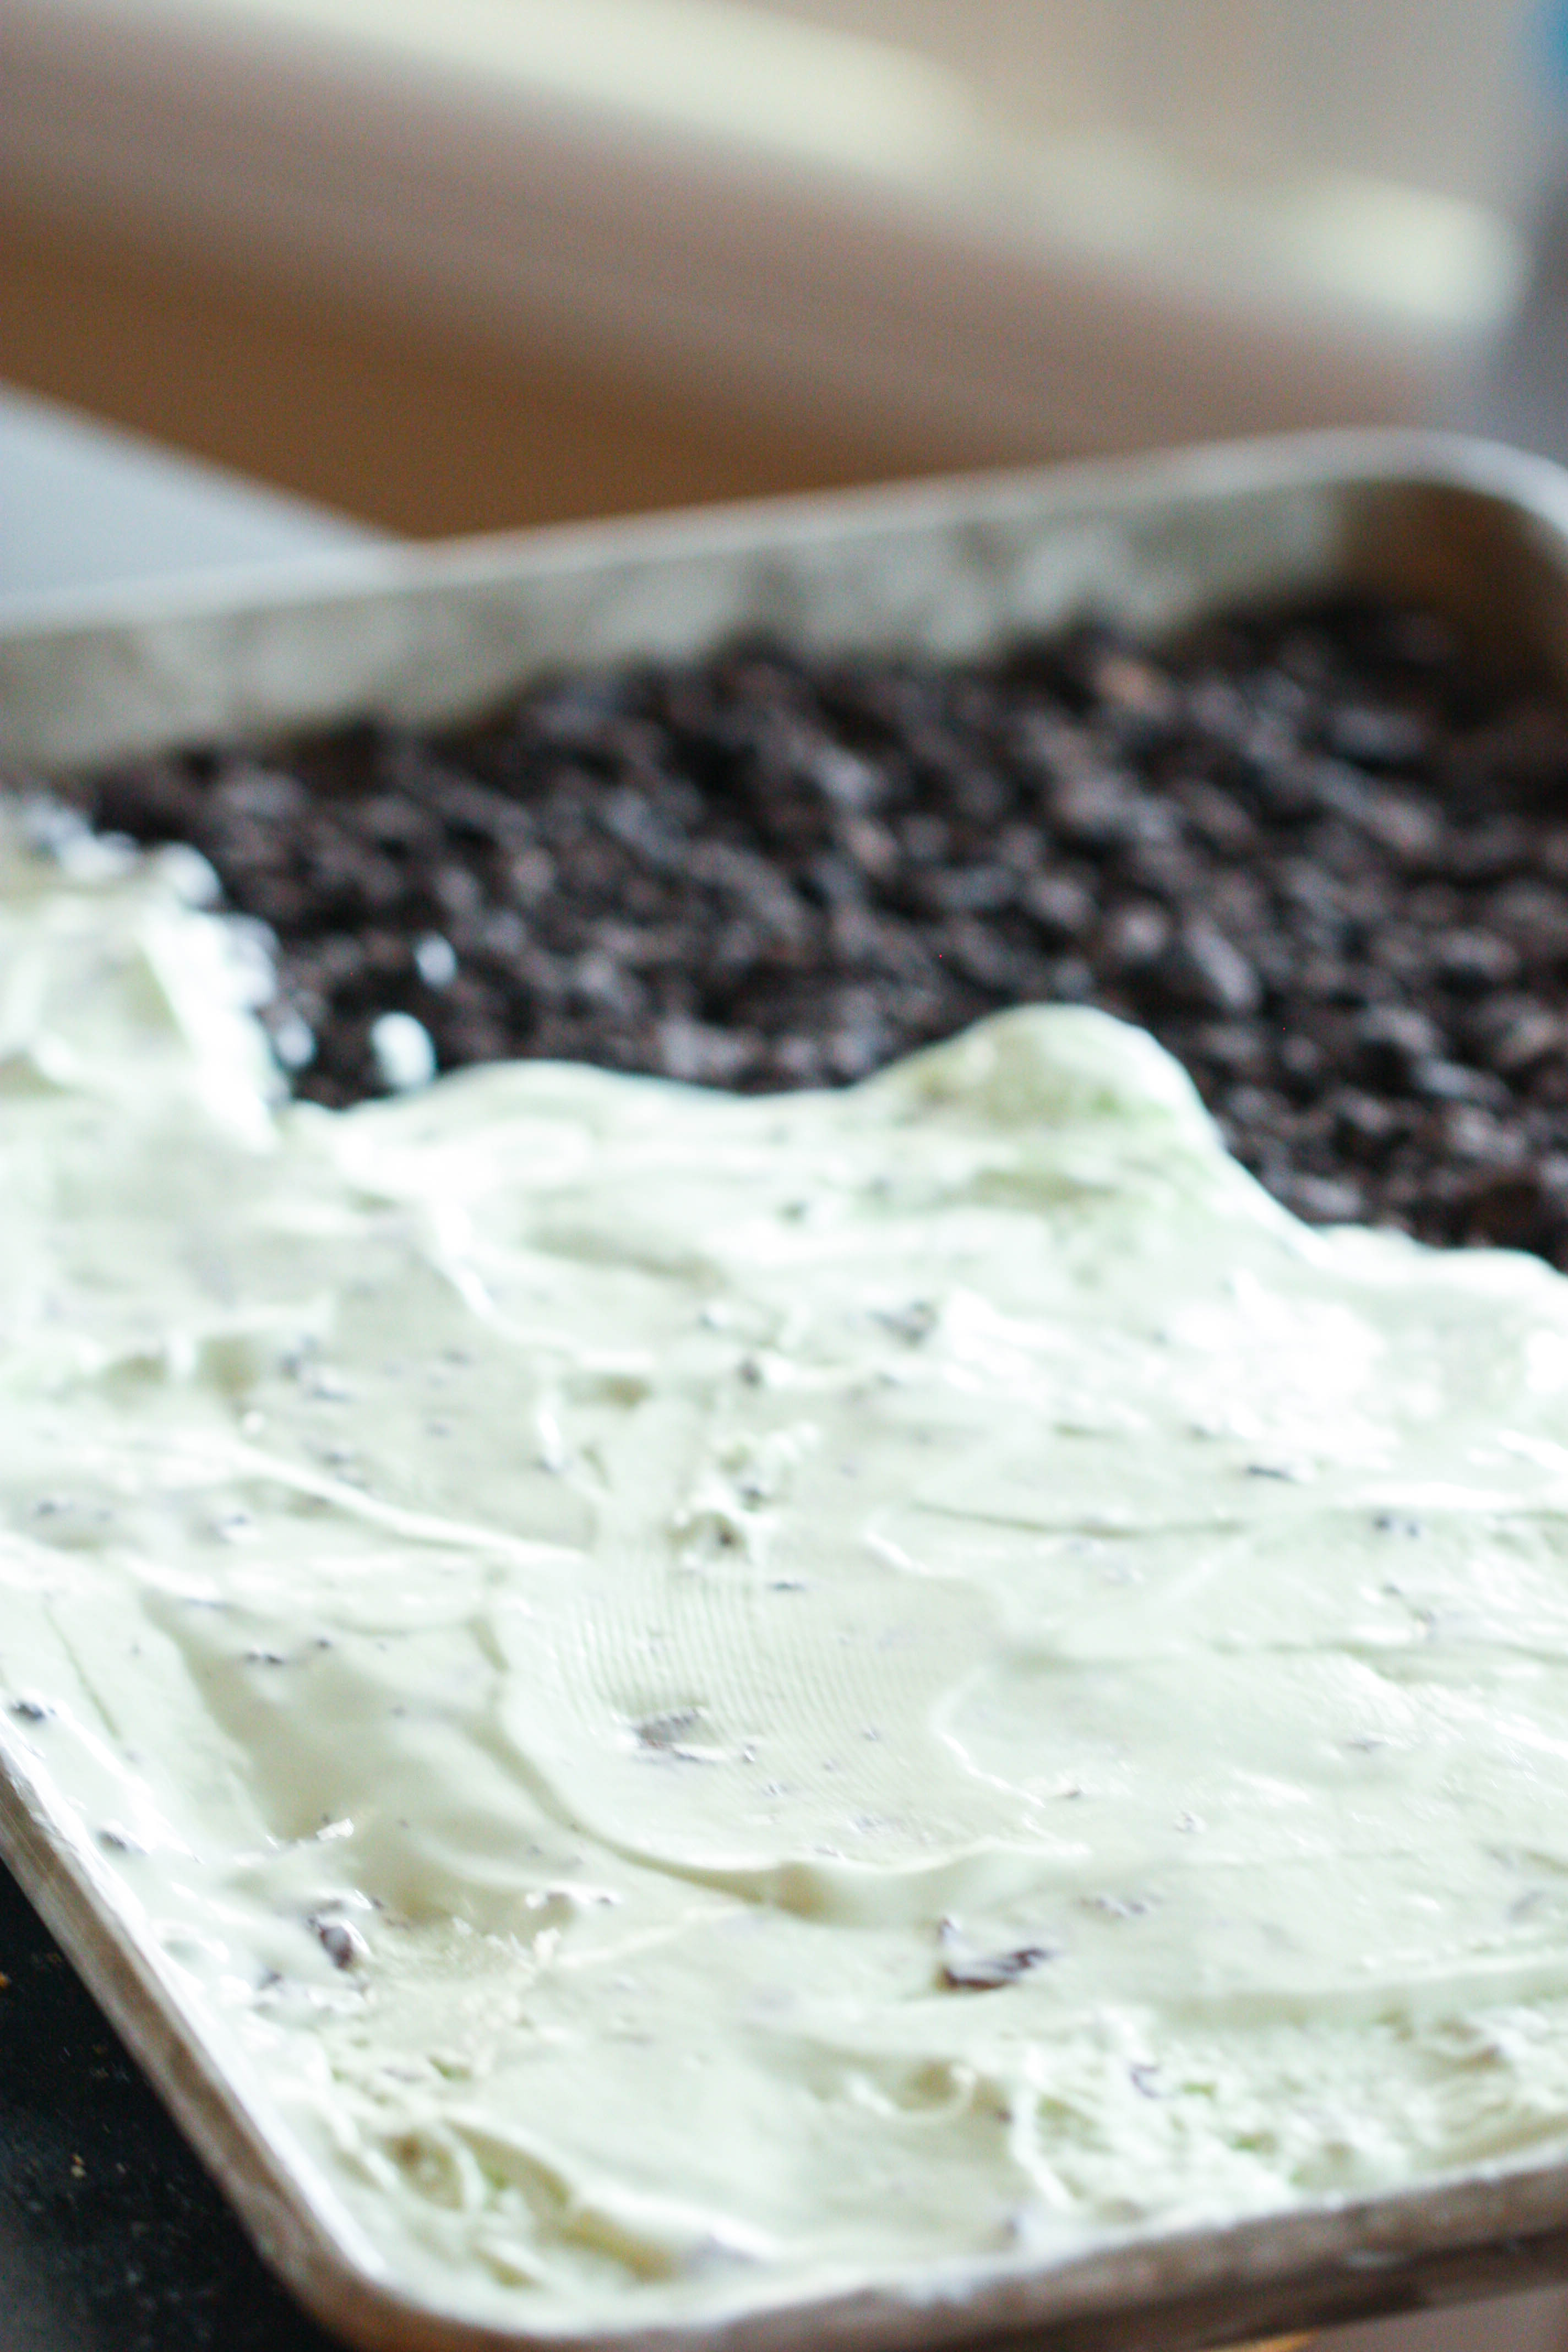 Mint chocolate layer spread on top of crushed oreo layer